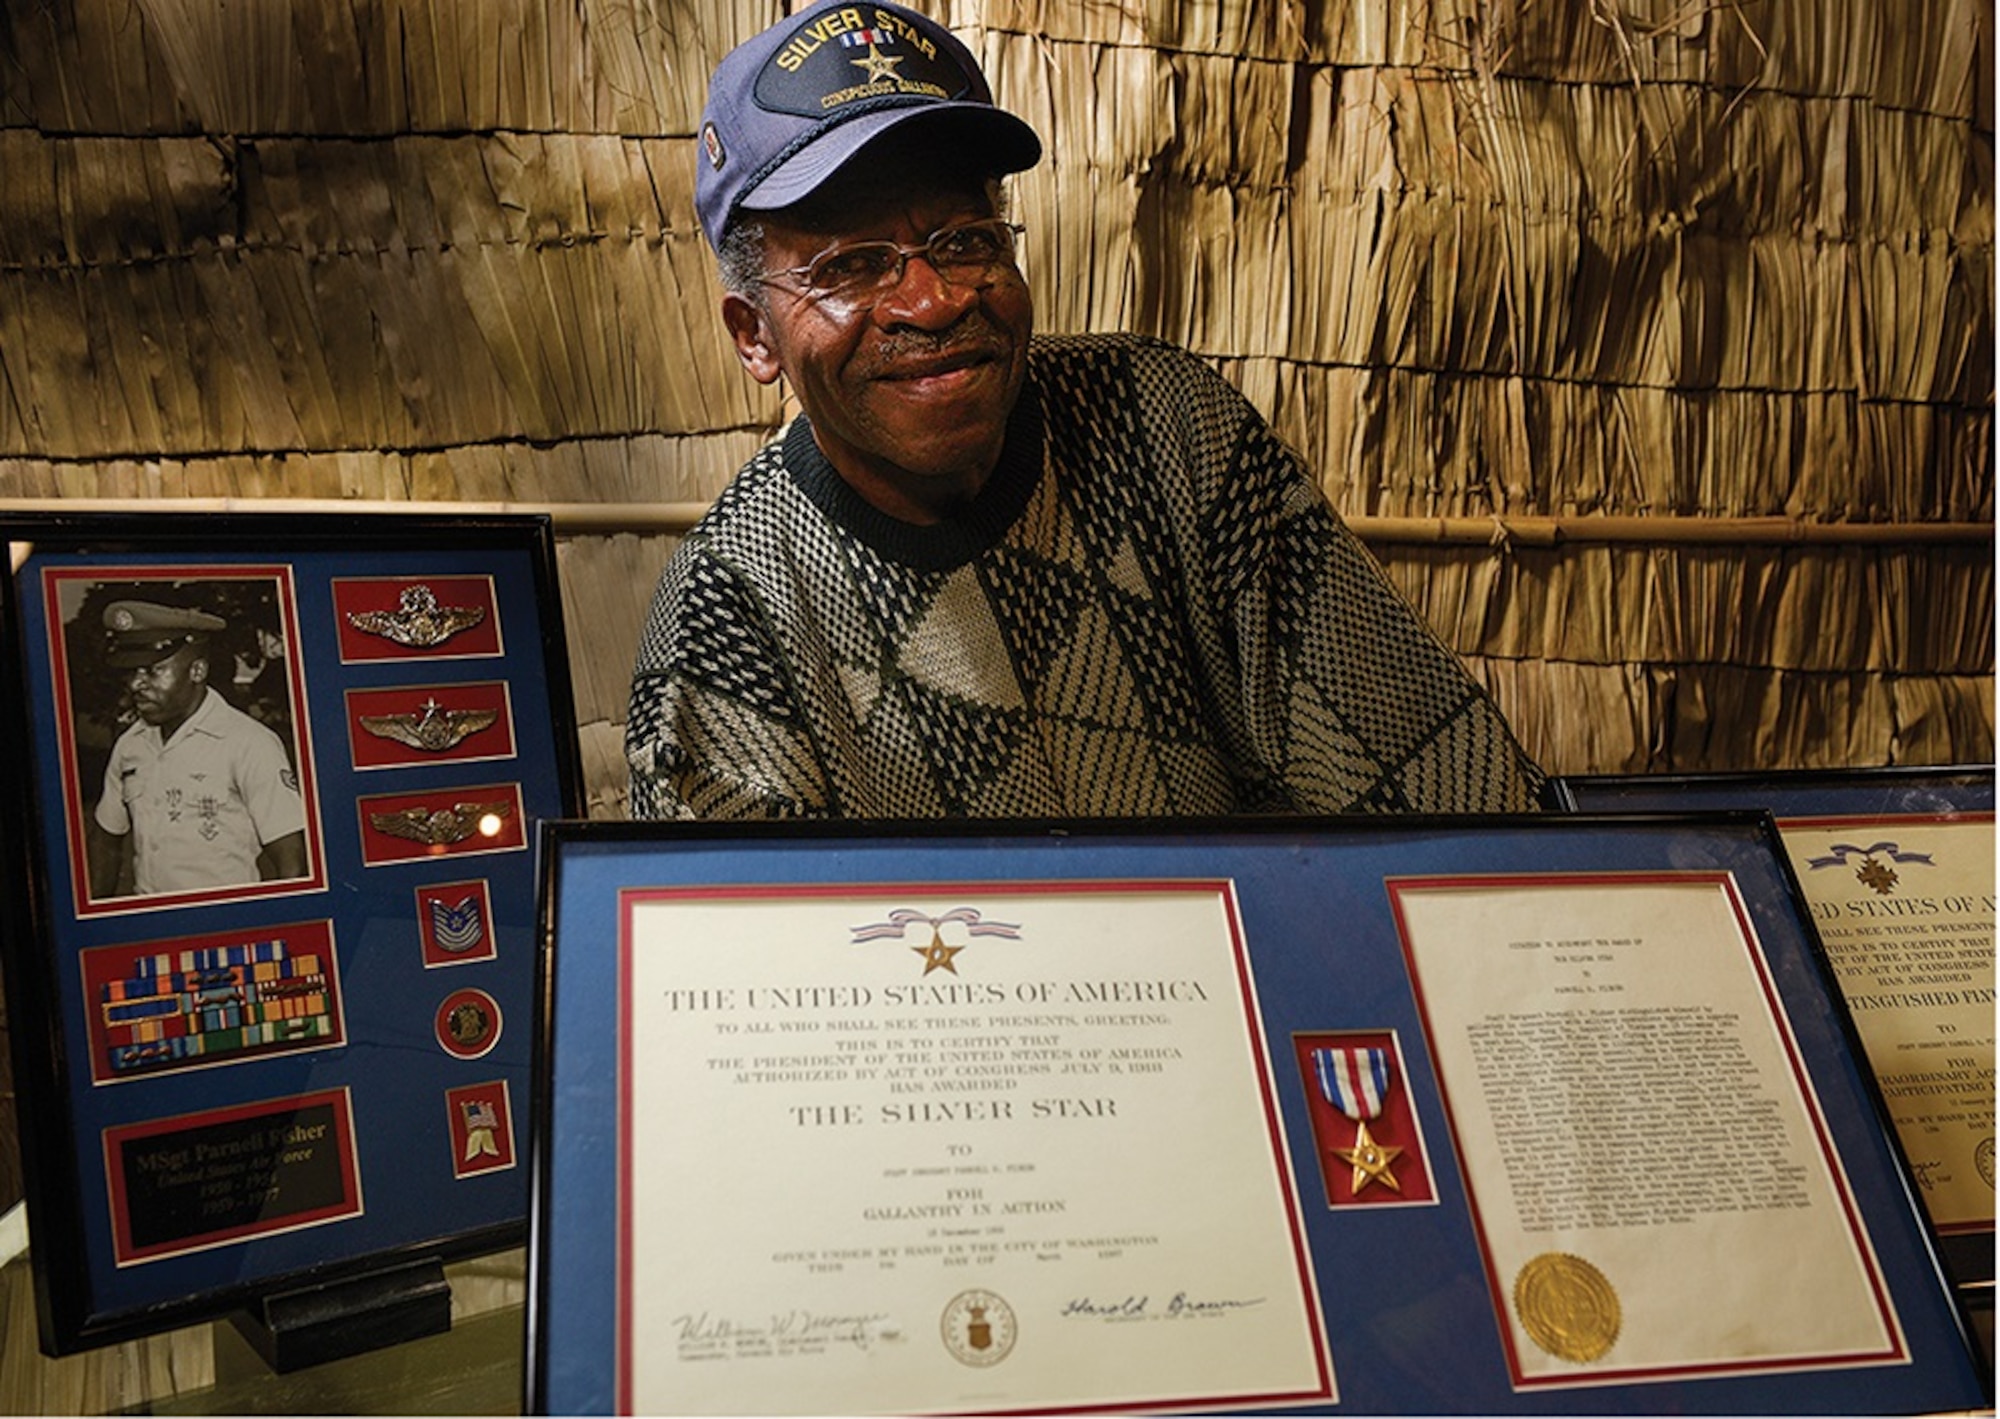 Master Sergeant (Ret.) Parnell Fisher is a decorated war veteran, serving 22 years as an Air Force loadmaster.  He first served from 1950 to 1954 and, after earning a bachelor’s degree in the ensuing years, served again from 1959 to 1977.  He was awarded a Silver Star for gallant actions on Dec. 18, 1966, while aboard an AC-47 Spooky, over Vung Tau, Vietnam.  During the routine mission, Fisher saved the life of the crew by tossing out a prematurely exploded flare from the aircraft.  Fisher and the flight engineer were handling 22-pound flares, set to go off on a timer.  As the engineer picked up a flare, it unexpectedly ignited.  The chute went out and knocked him unconscious.  “I get to the flare, go to the doorway and throw the dang thing out,” Fisher said.  Thinking he had averted disaster, Fisher was distressed to see the flare’s chute hanging onto the edge of the plane’s cargo door.  He feverishly cut at the attached cords, fighting to snip the tightly wound strings clutching to the cargo door and threatening the lives of the crew.  Fisher was able to cut the flare’s chute loose just in time, severing the lines and looking on as the flare exploded outside seconds later.